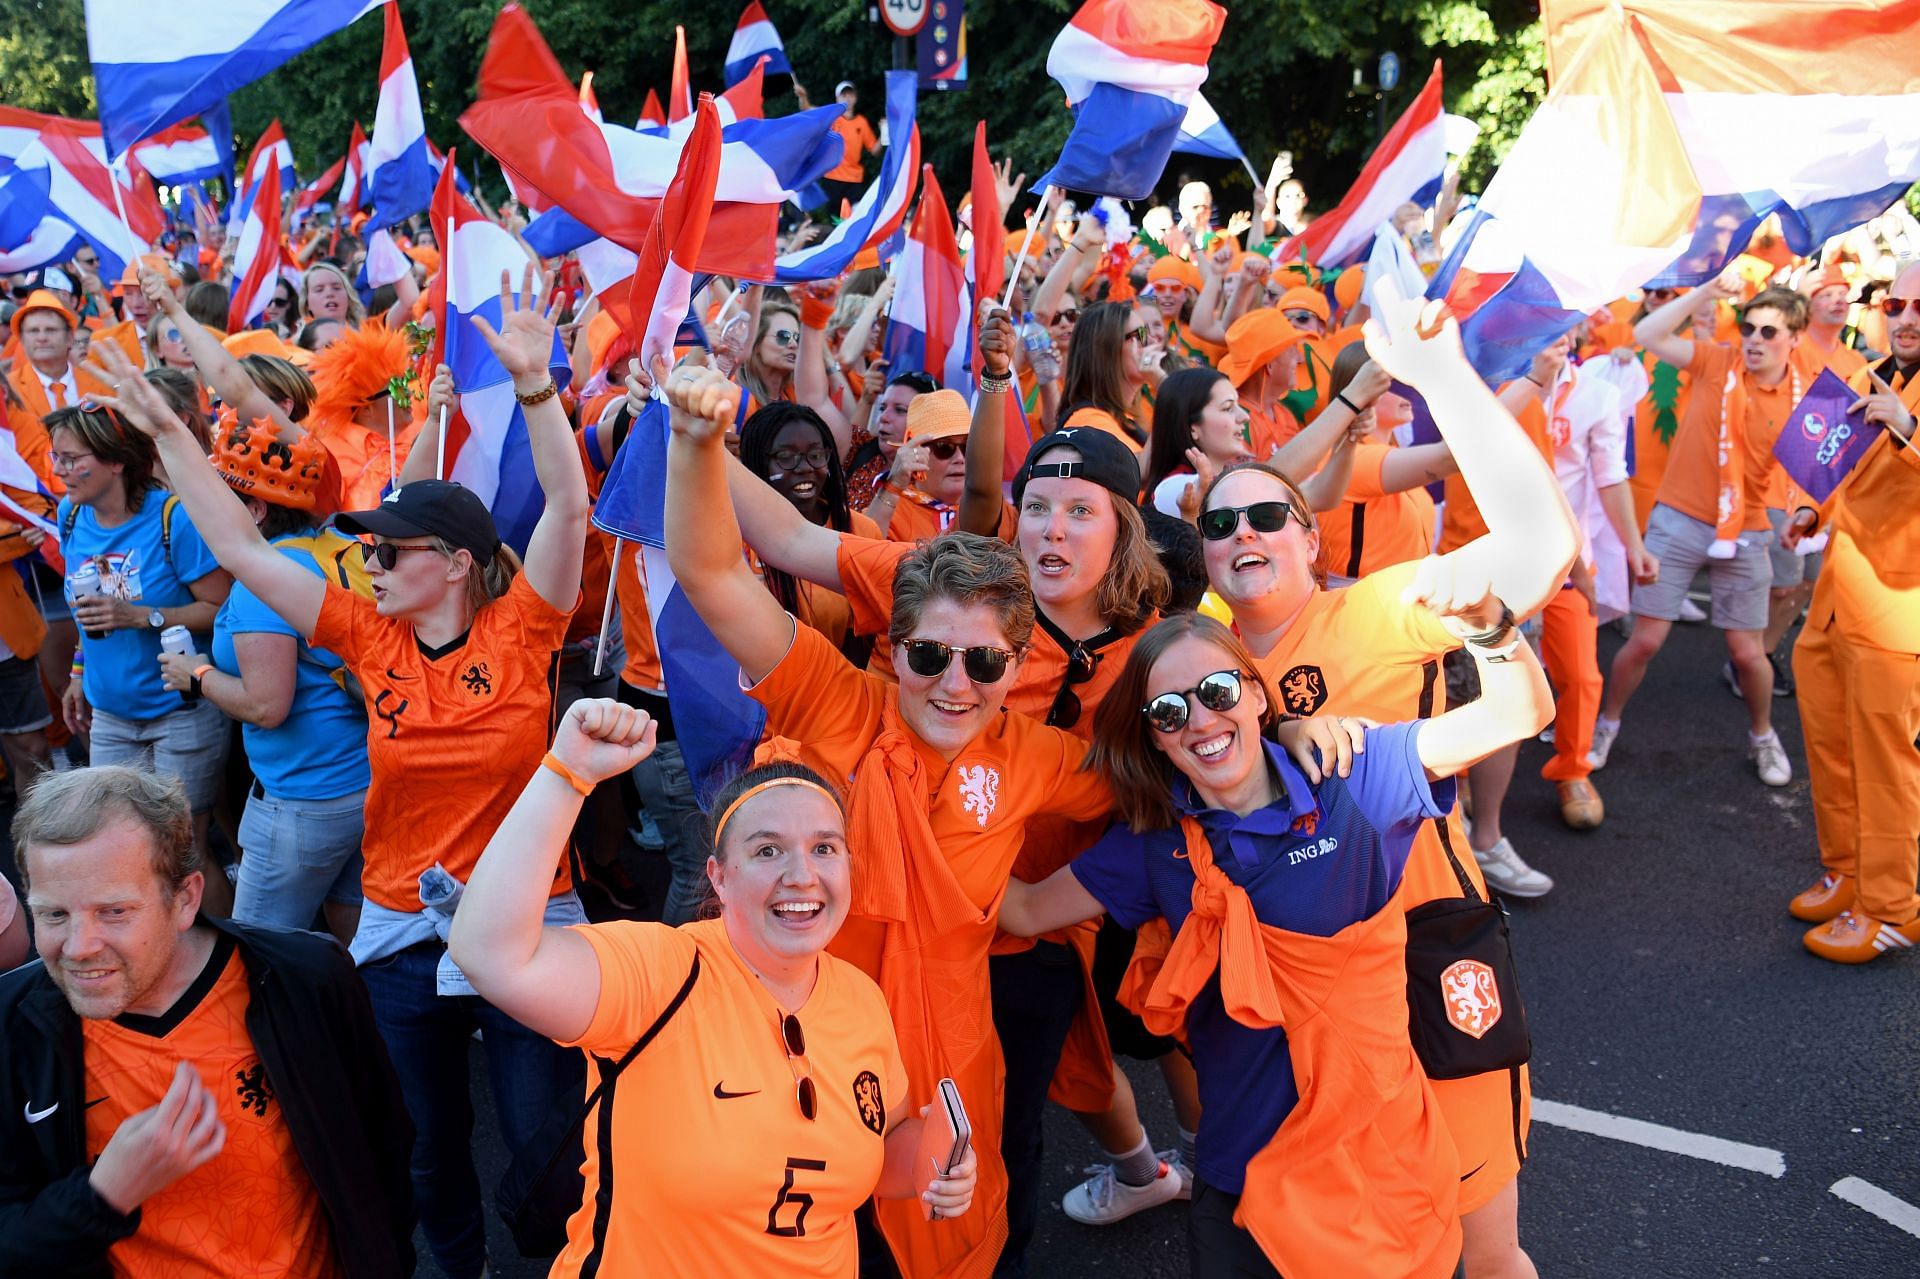 Netherlands faithful will be in full force against Switzerland.